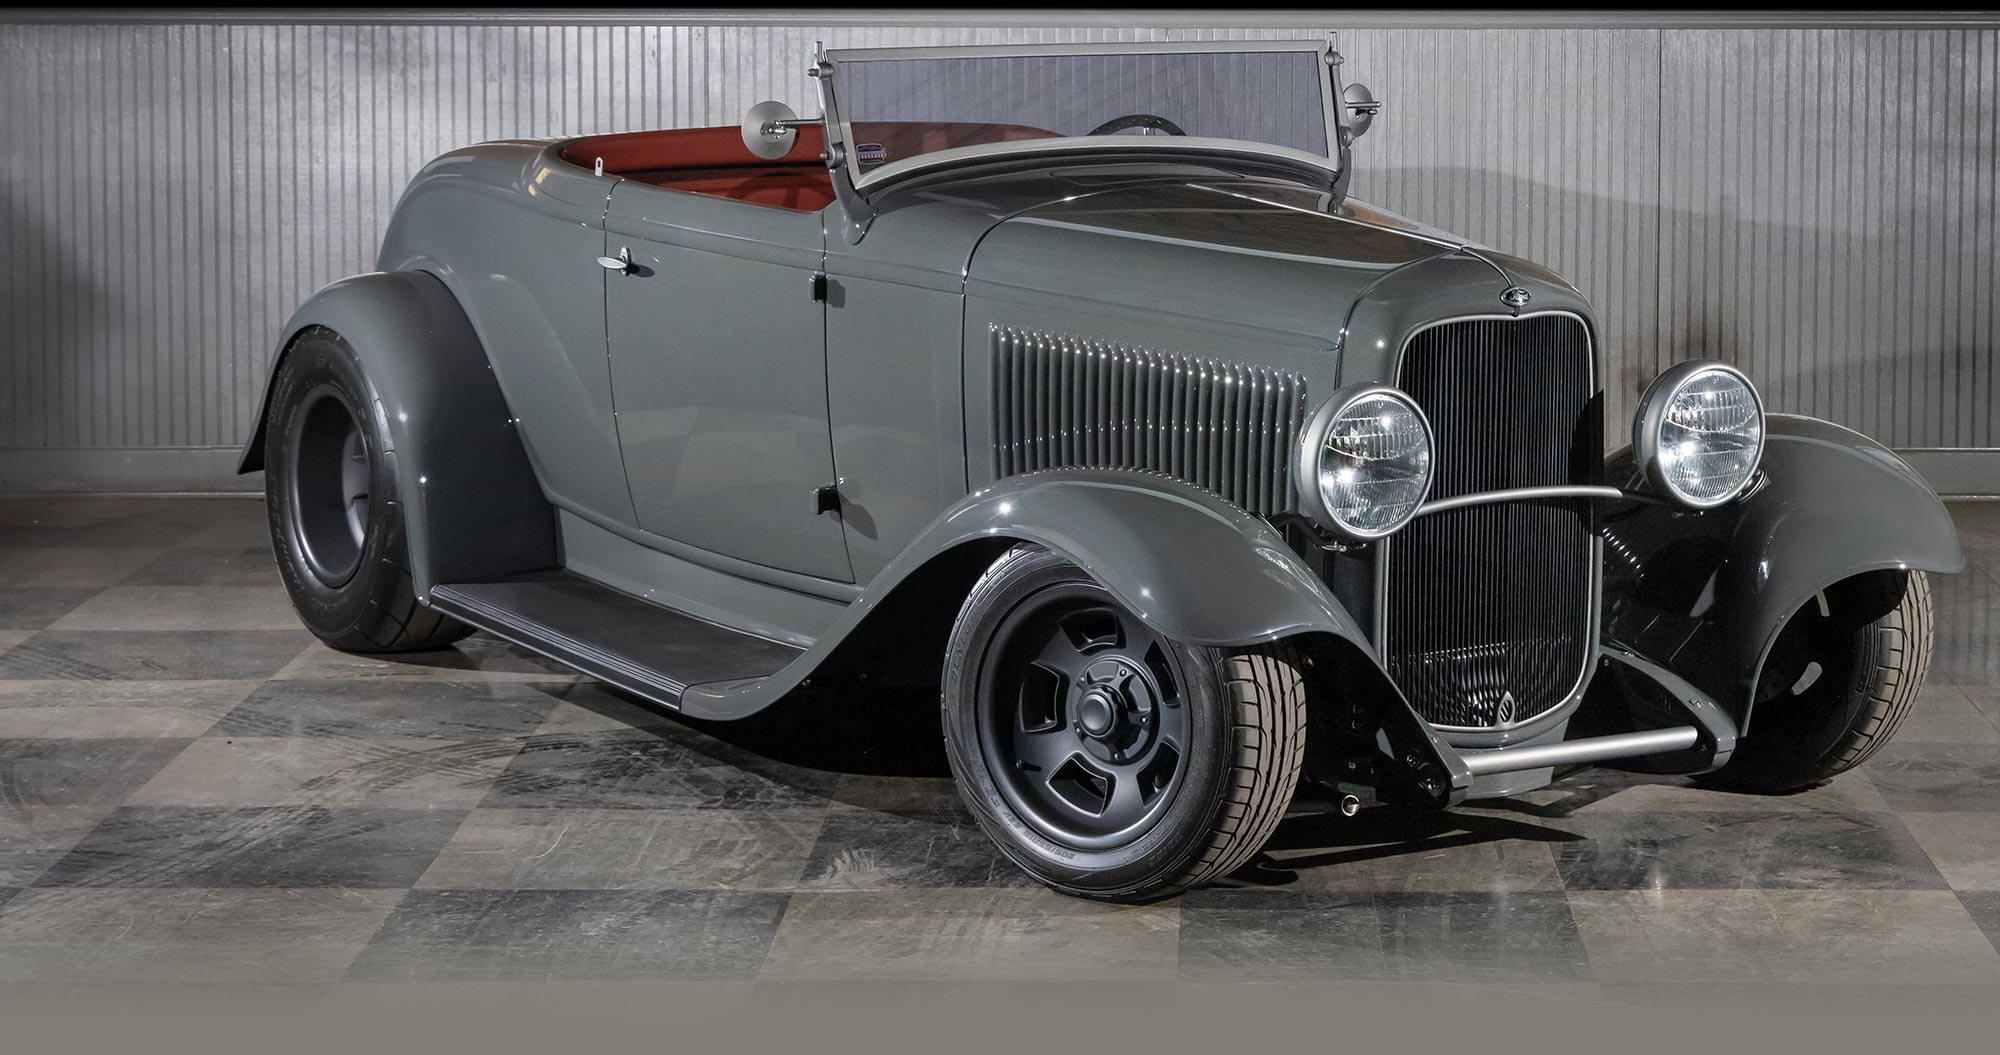 three quarter passenger side view of the gray ’32 Ford roadster